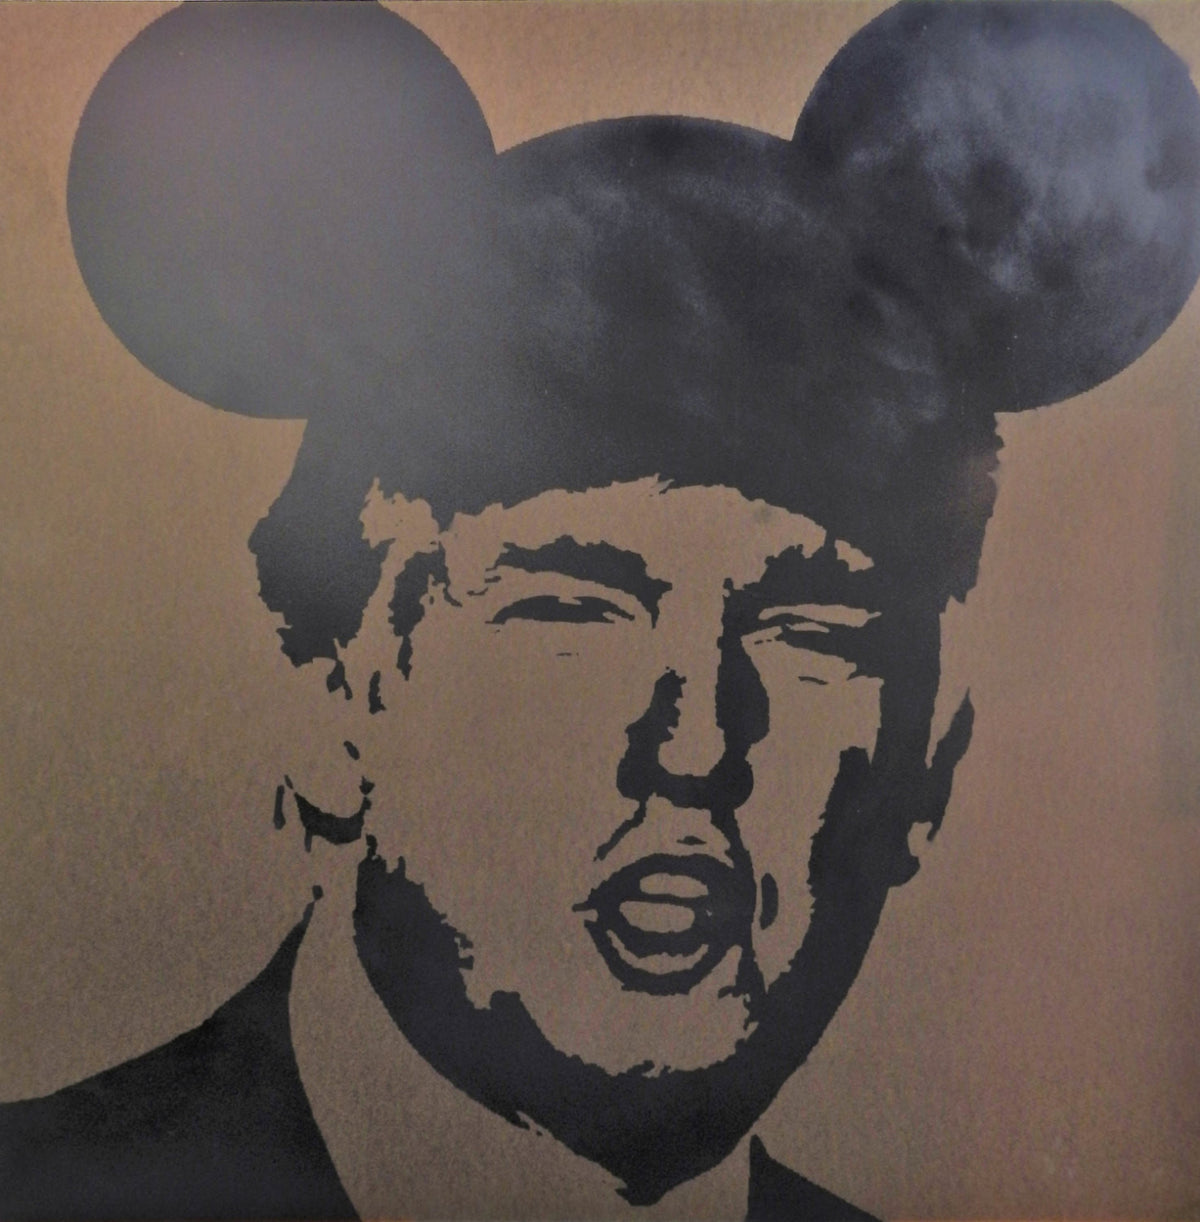 SOLD - 48x48 Original Artwork "Operation Mickey Mouse" featuring Trump - Politically Incorrect